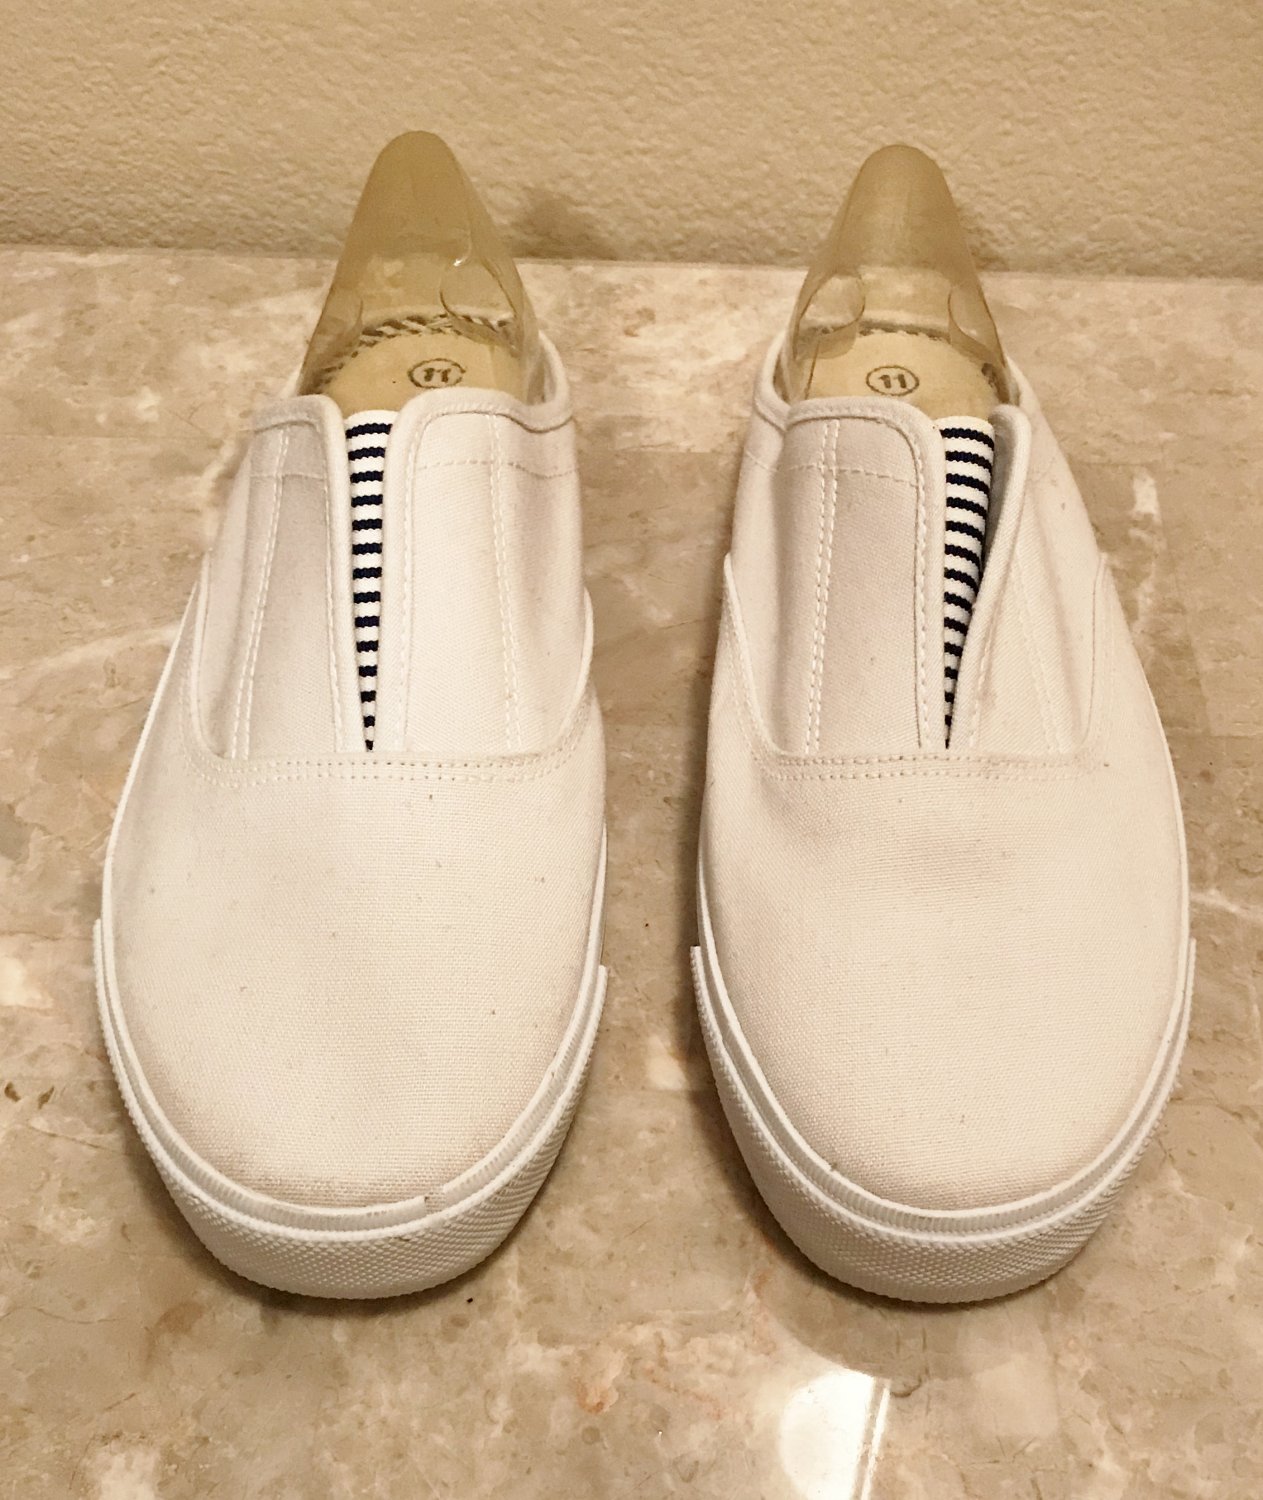 NWT Ladies SNEAKER MULES Athletic Shoes SIZE 11 WHITE Canvas Slip Ons